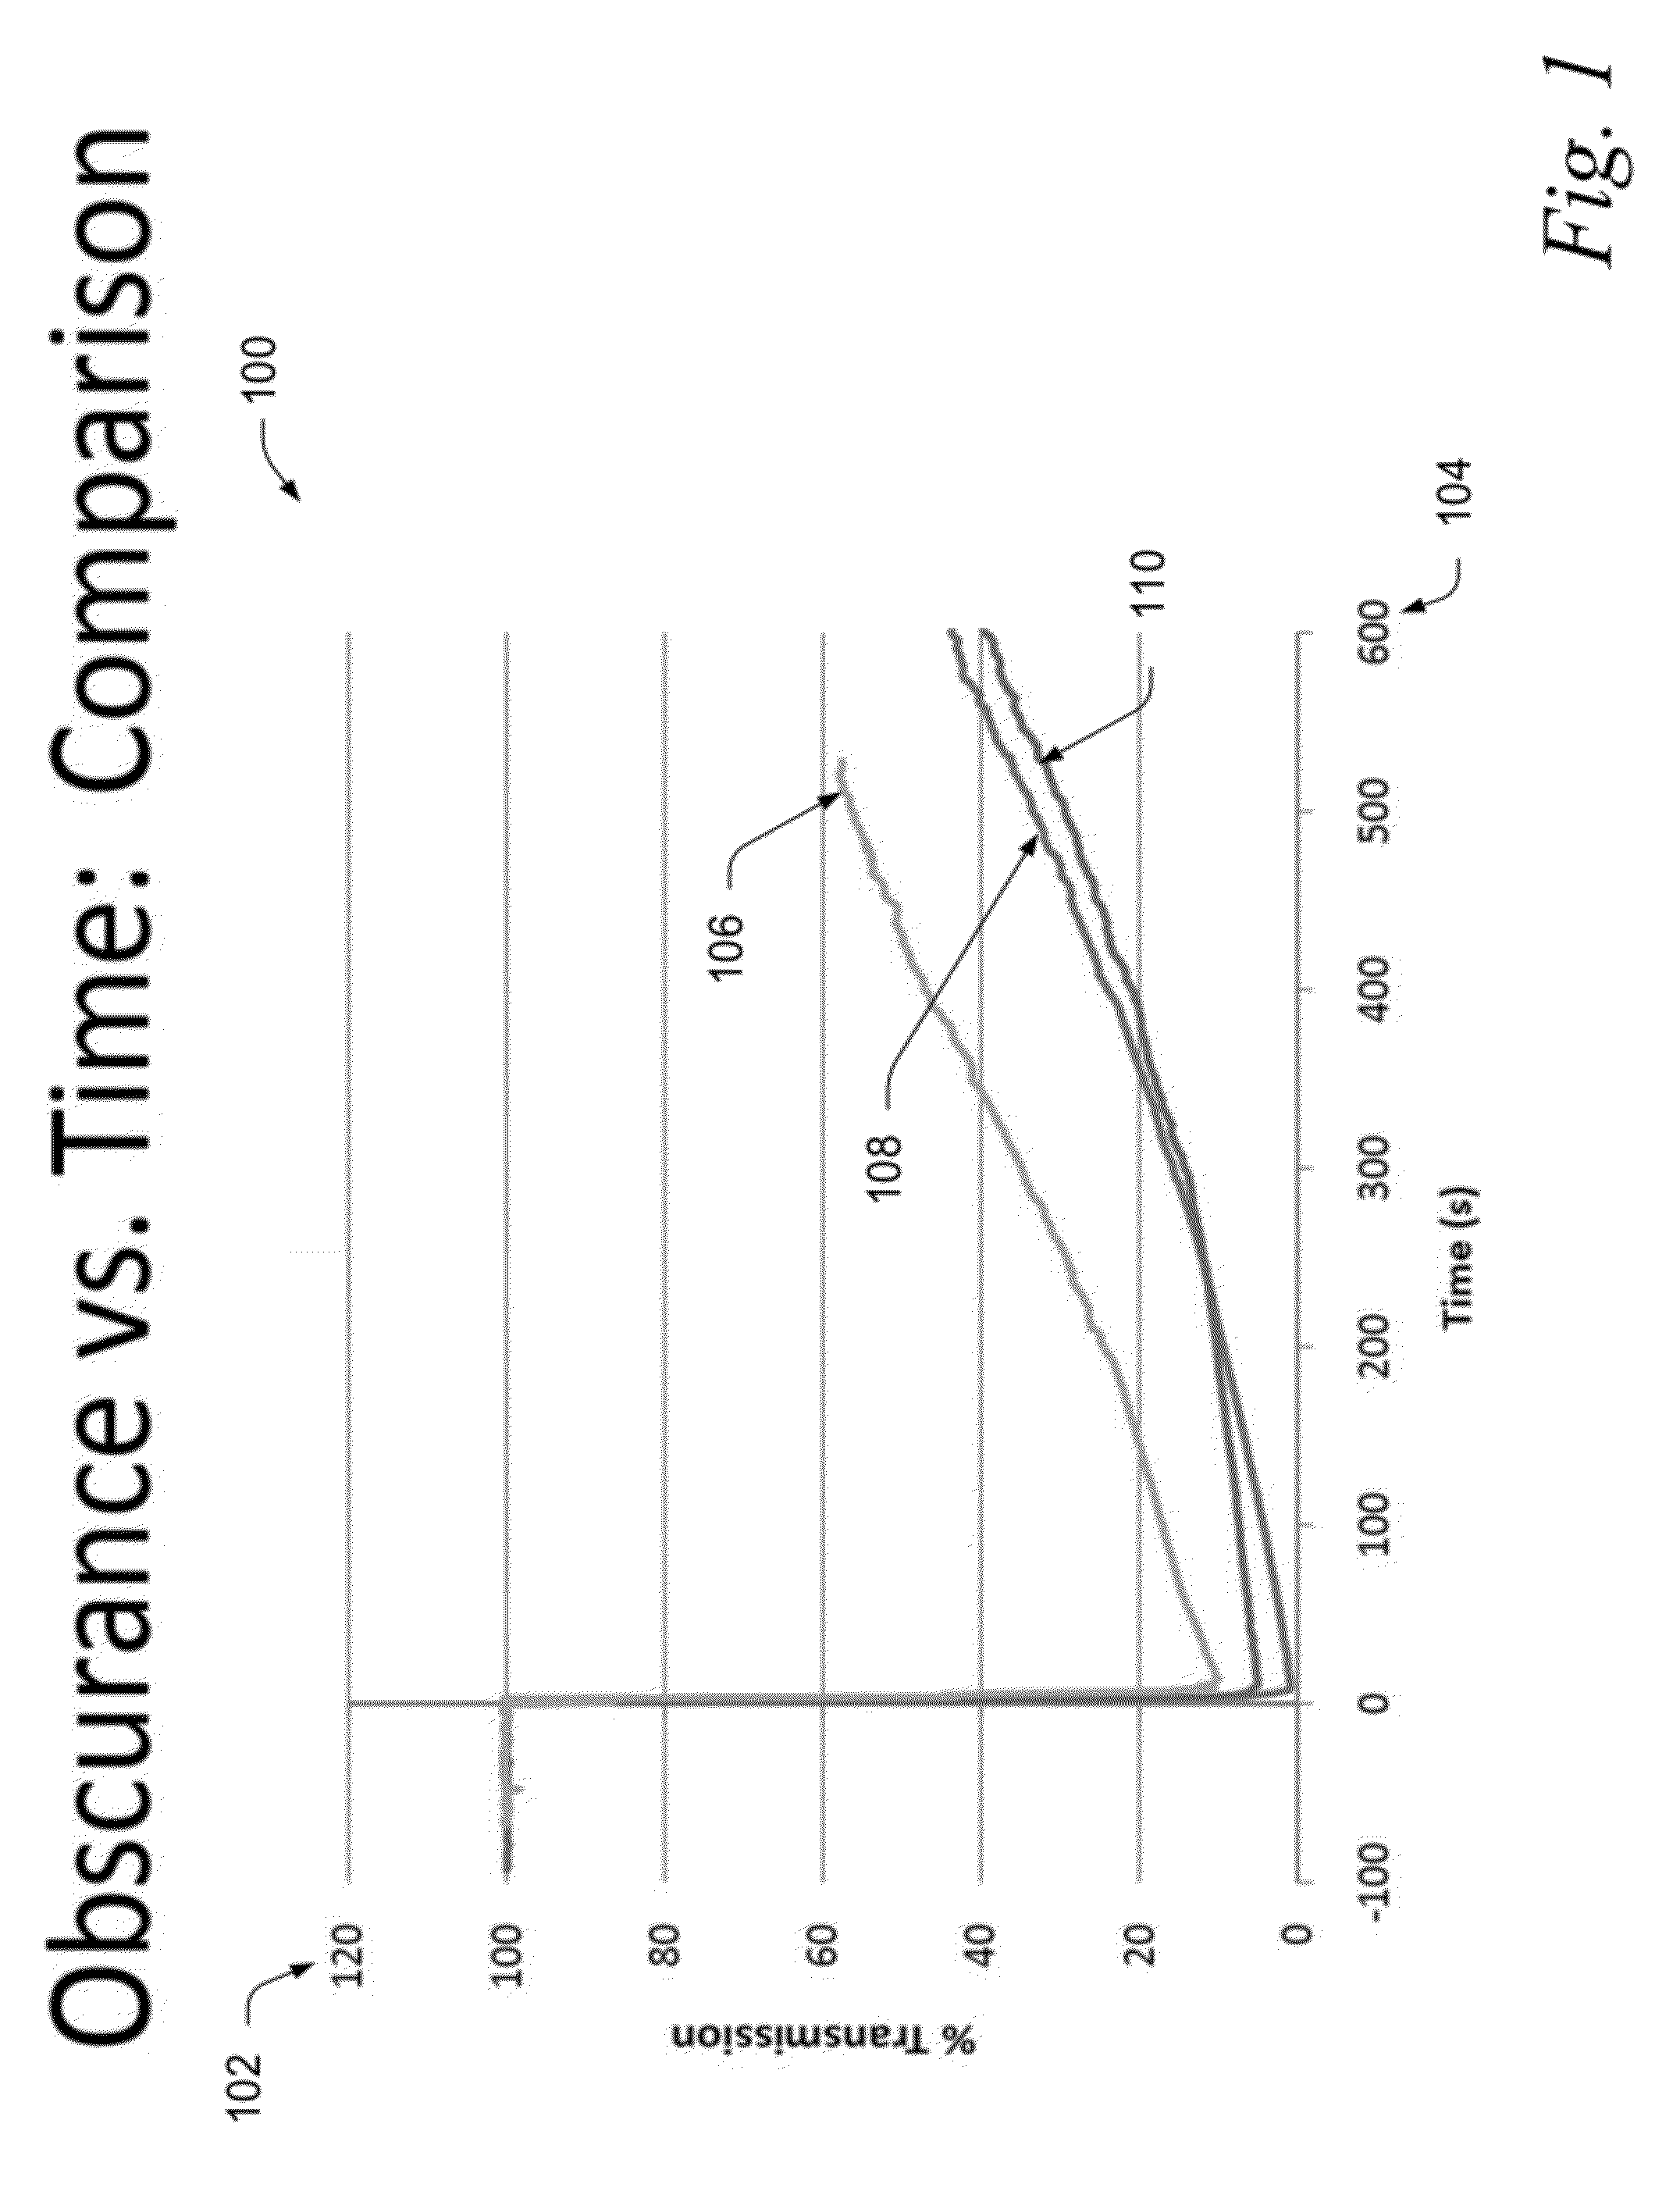 Nontoxic Obscurant Compositions and Method of Using Same